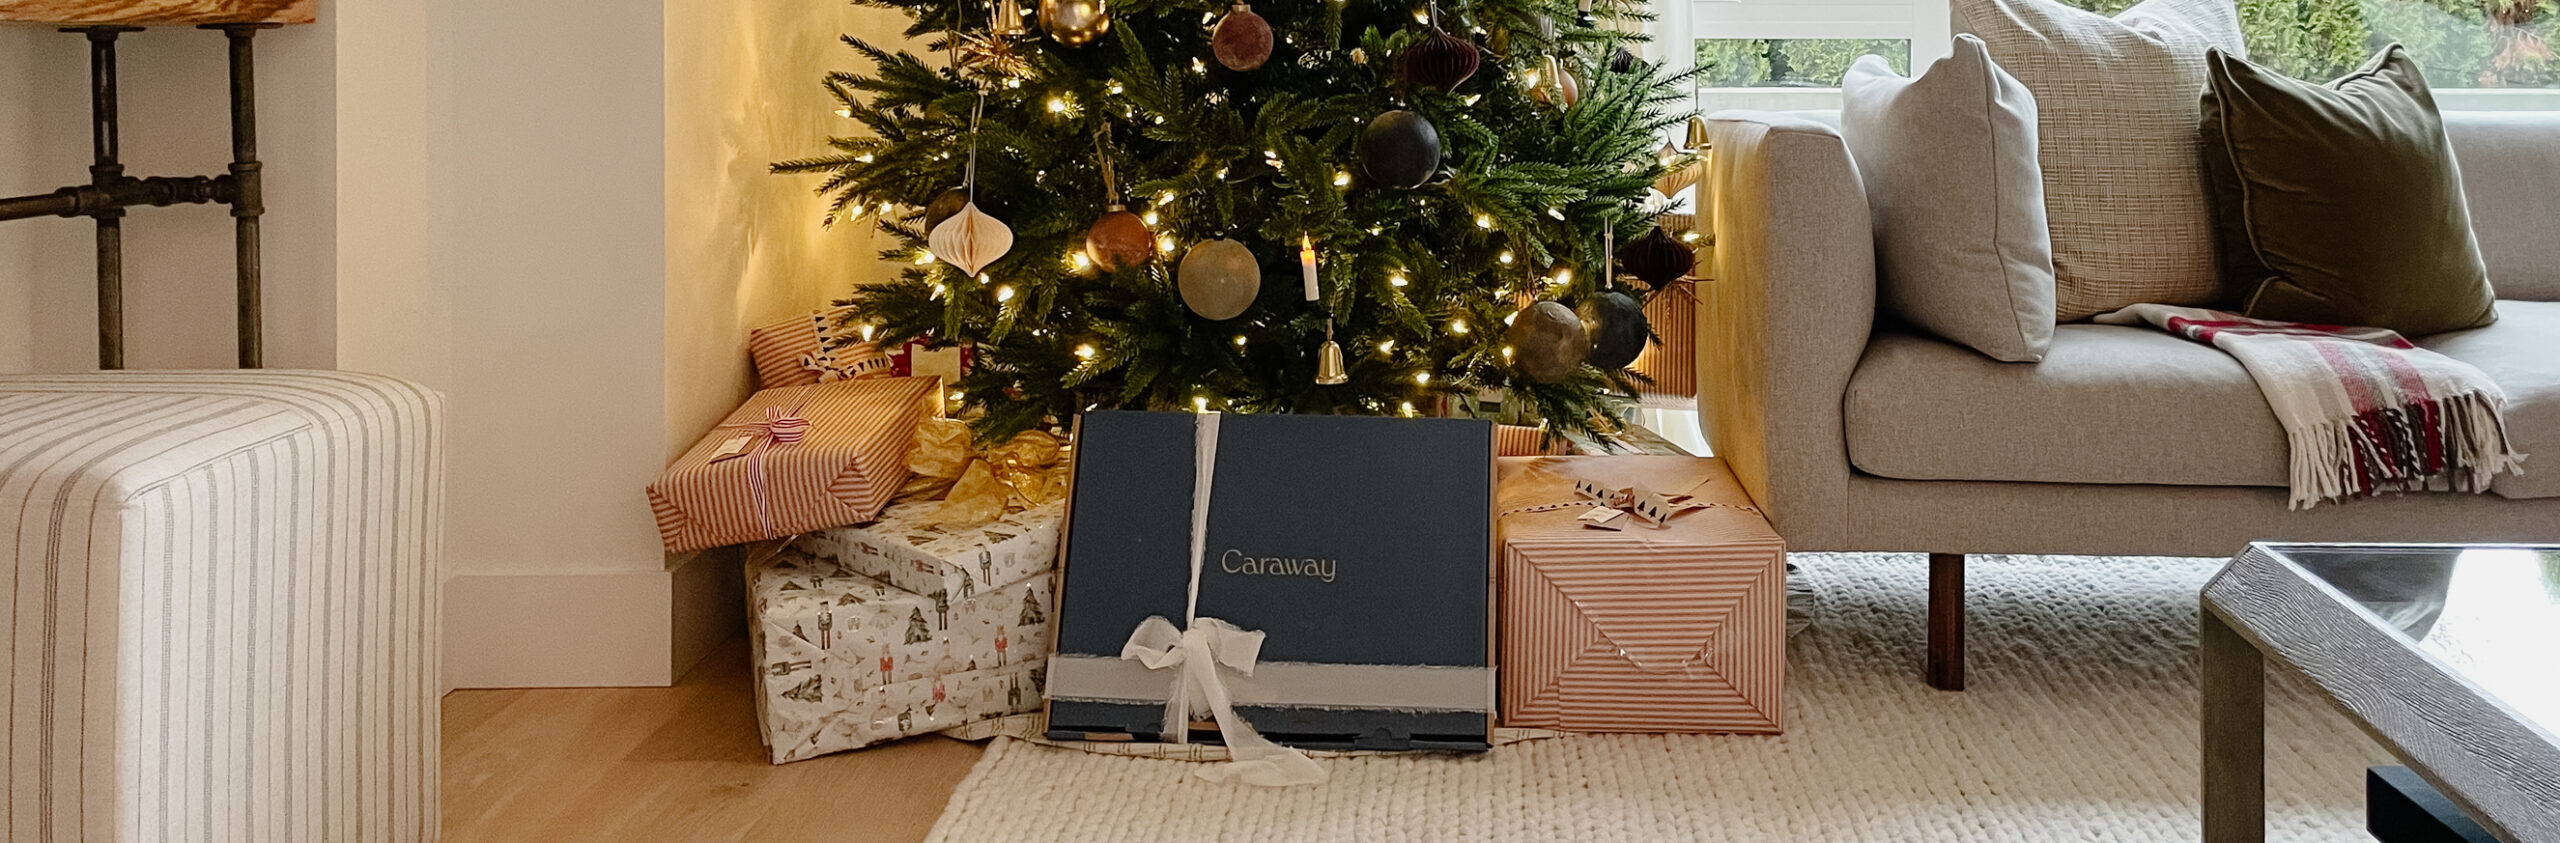 Last minute Christmas gift idea is a Caraway gift card - under a tree with several other presents.